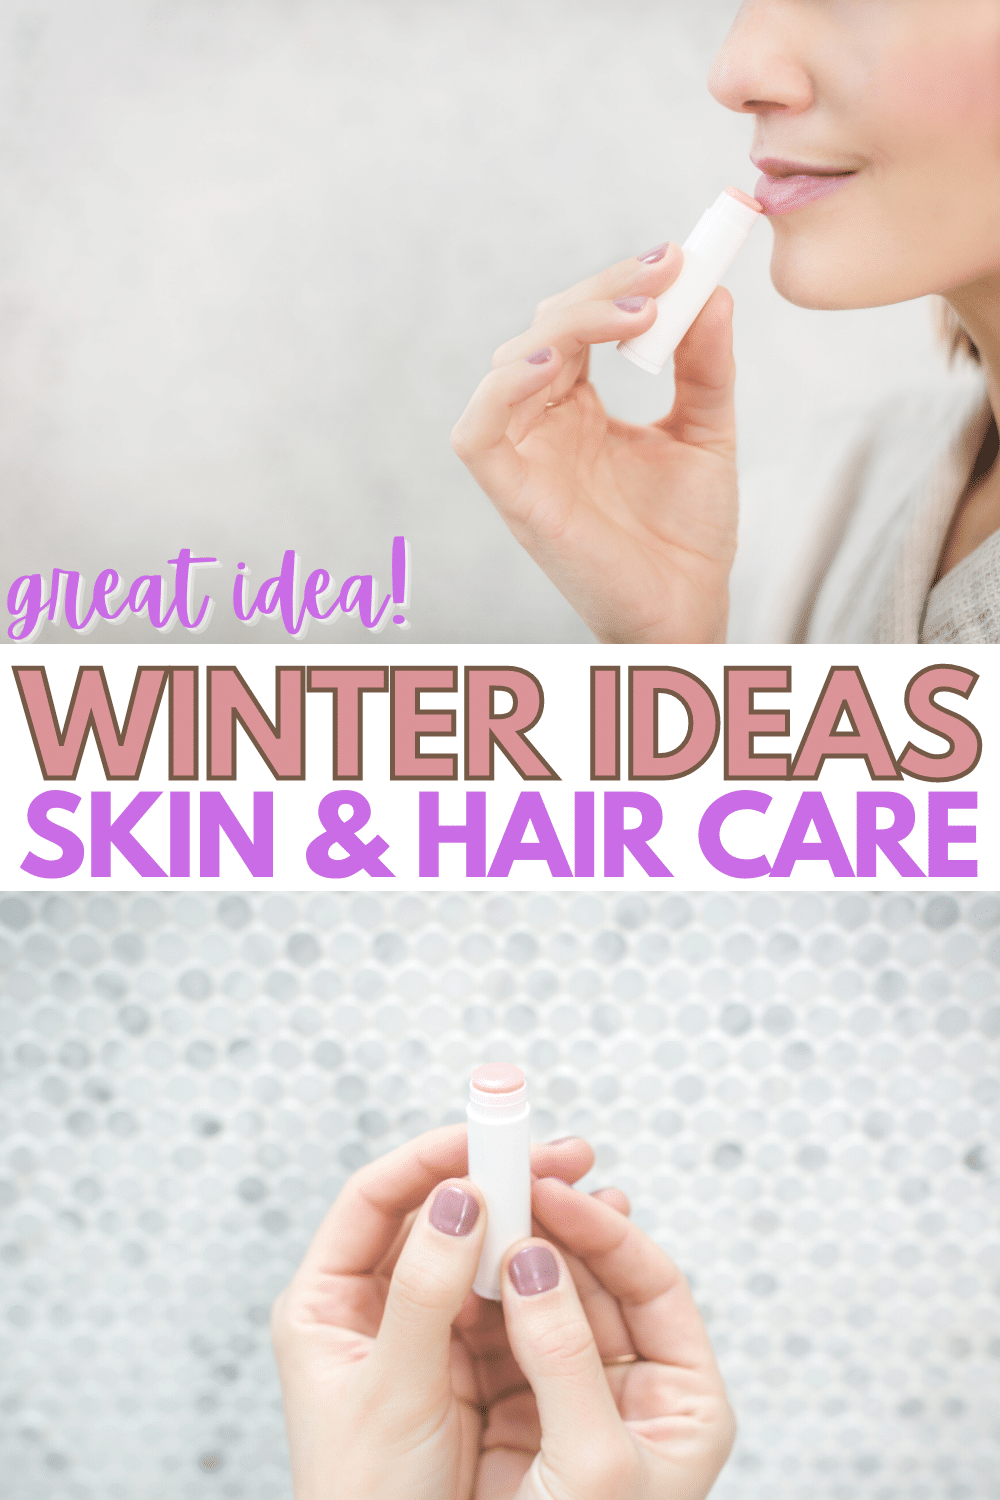 Winter conditions can wreak havoc on your skin and hair. Fend off the harmful effects of cold, harsh weather with these winter skin and hair care tips. #winter #skincare #hairtips #beautytips via @wondermomwannab